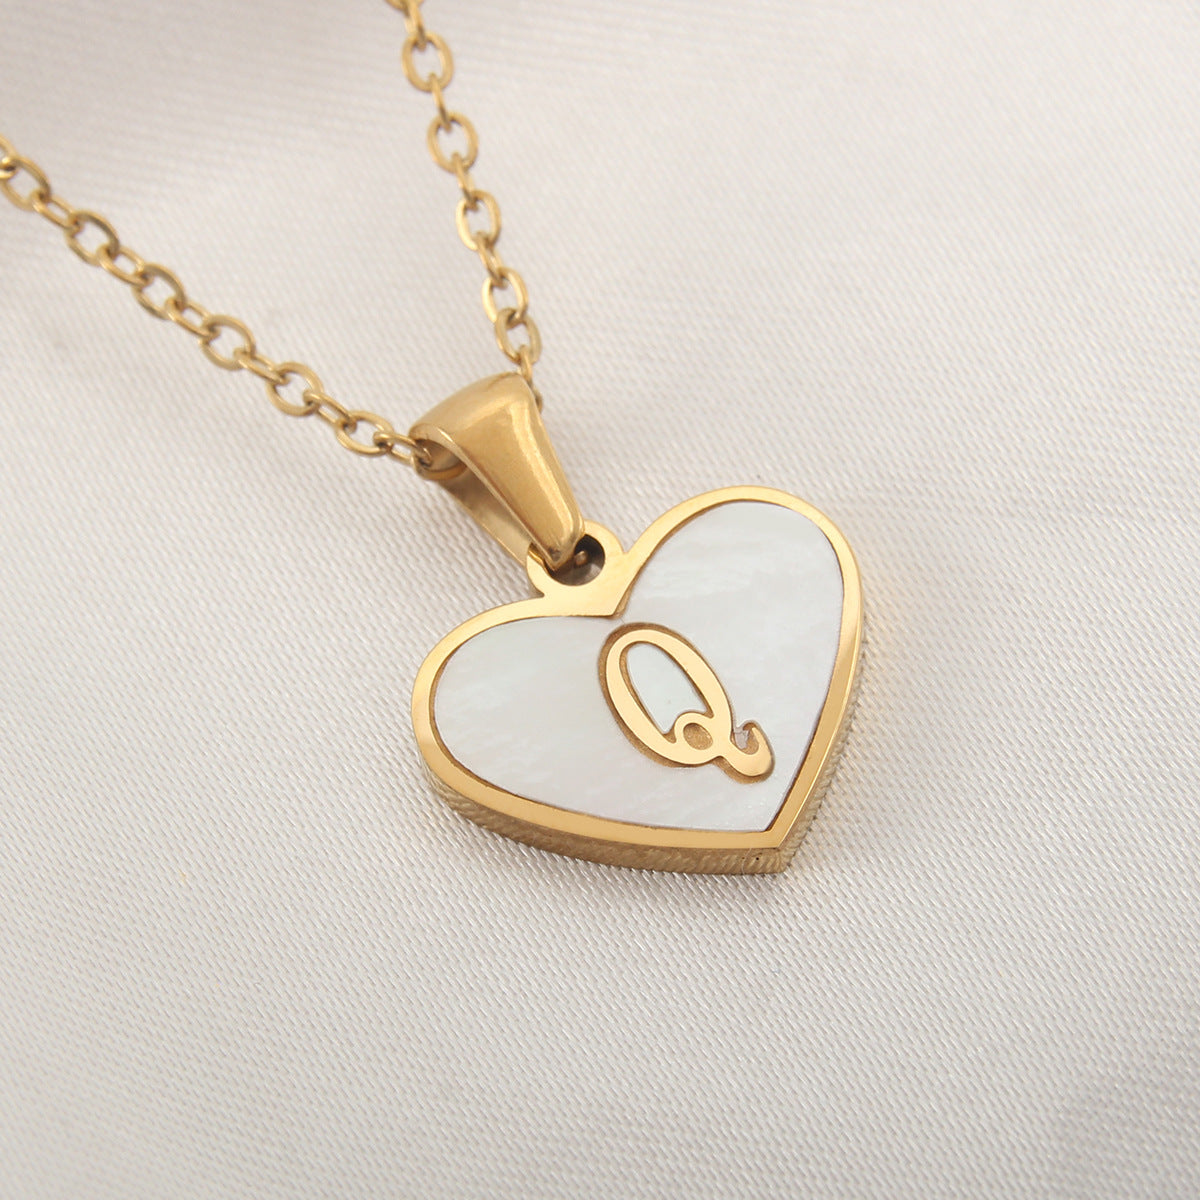 Initial Heart-shaped Necklace White Shell Love Clavicle Chain Fashion Personalized Necklace For Women Jewelry Valentine's Day